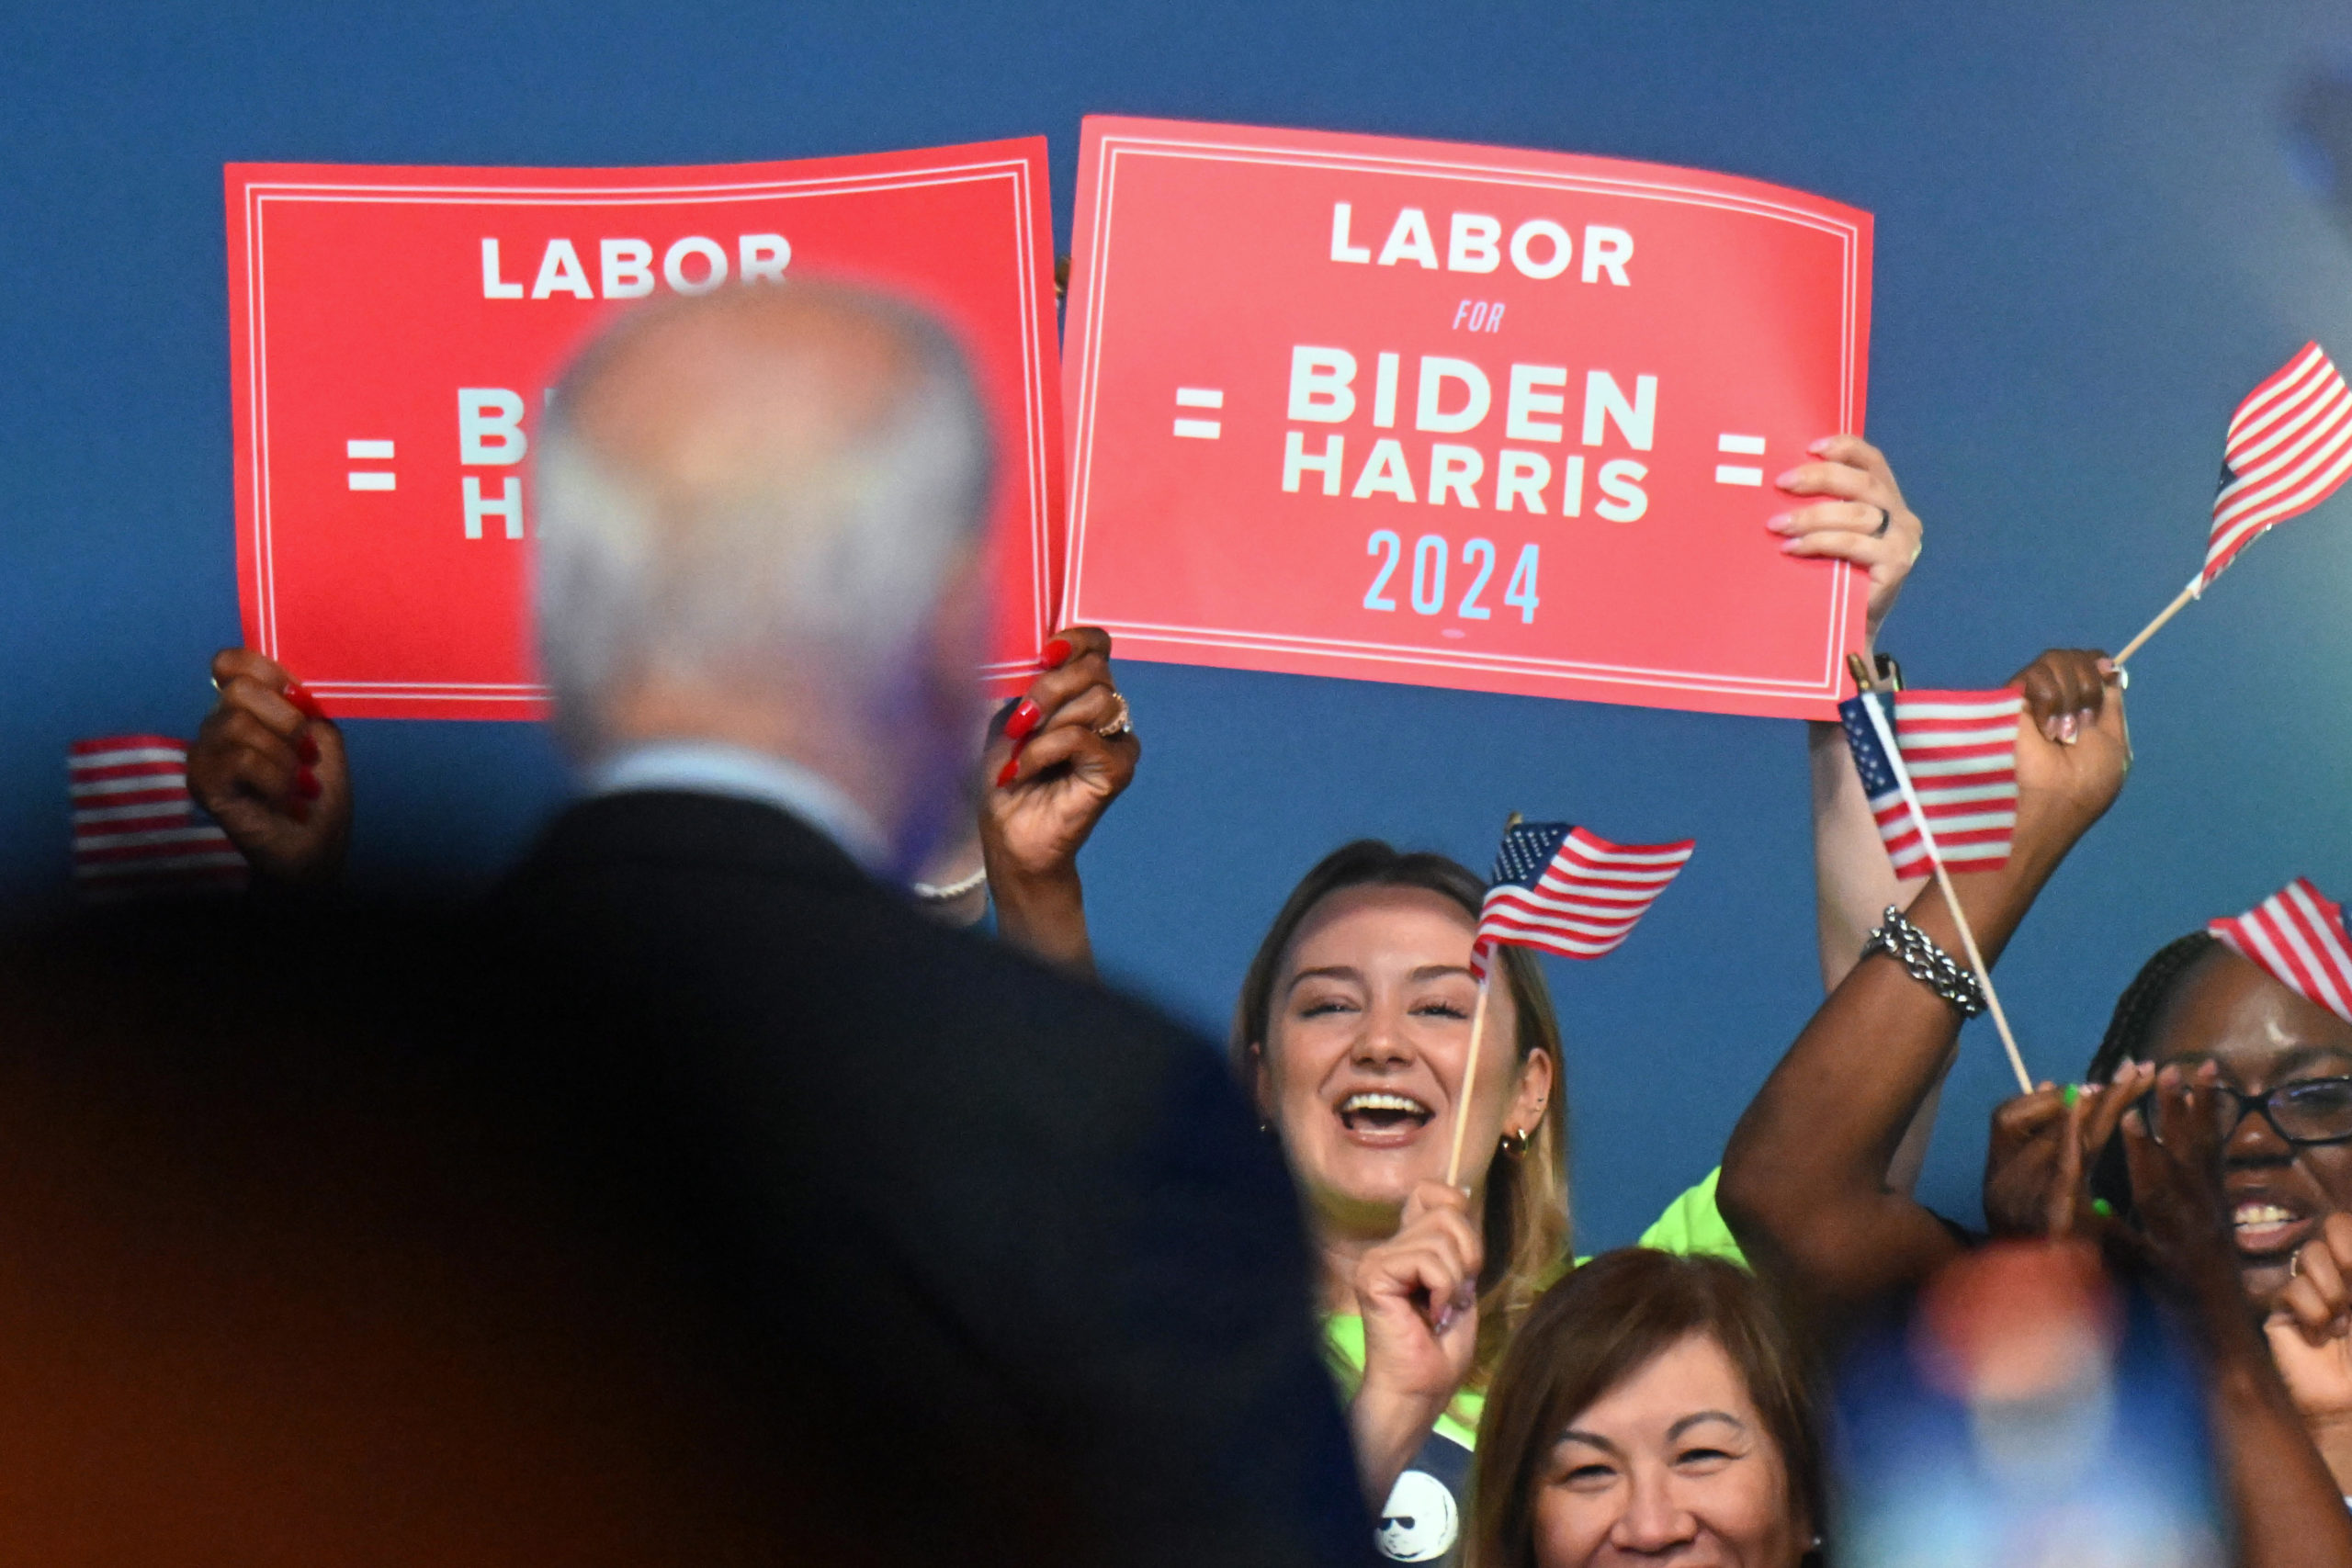 Supporters cheer as U.S. President Joe Biden addresses union workers on June 17, 2023 in Philadelphia, Pennsylvania. The labor rally highlights workers and the issues that motivate them to take action in advance of the 2024 election. (Photo by Mark Makela/Getty Images)